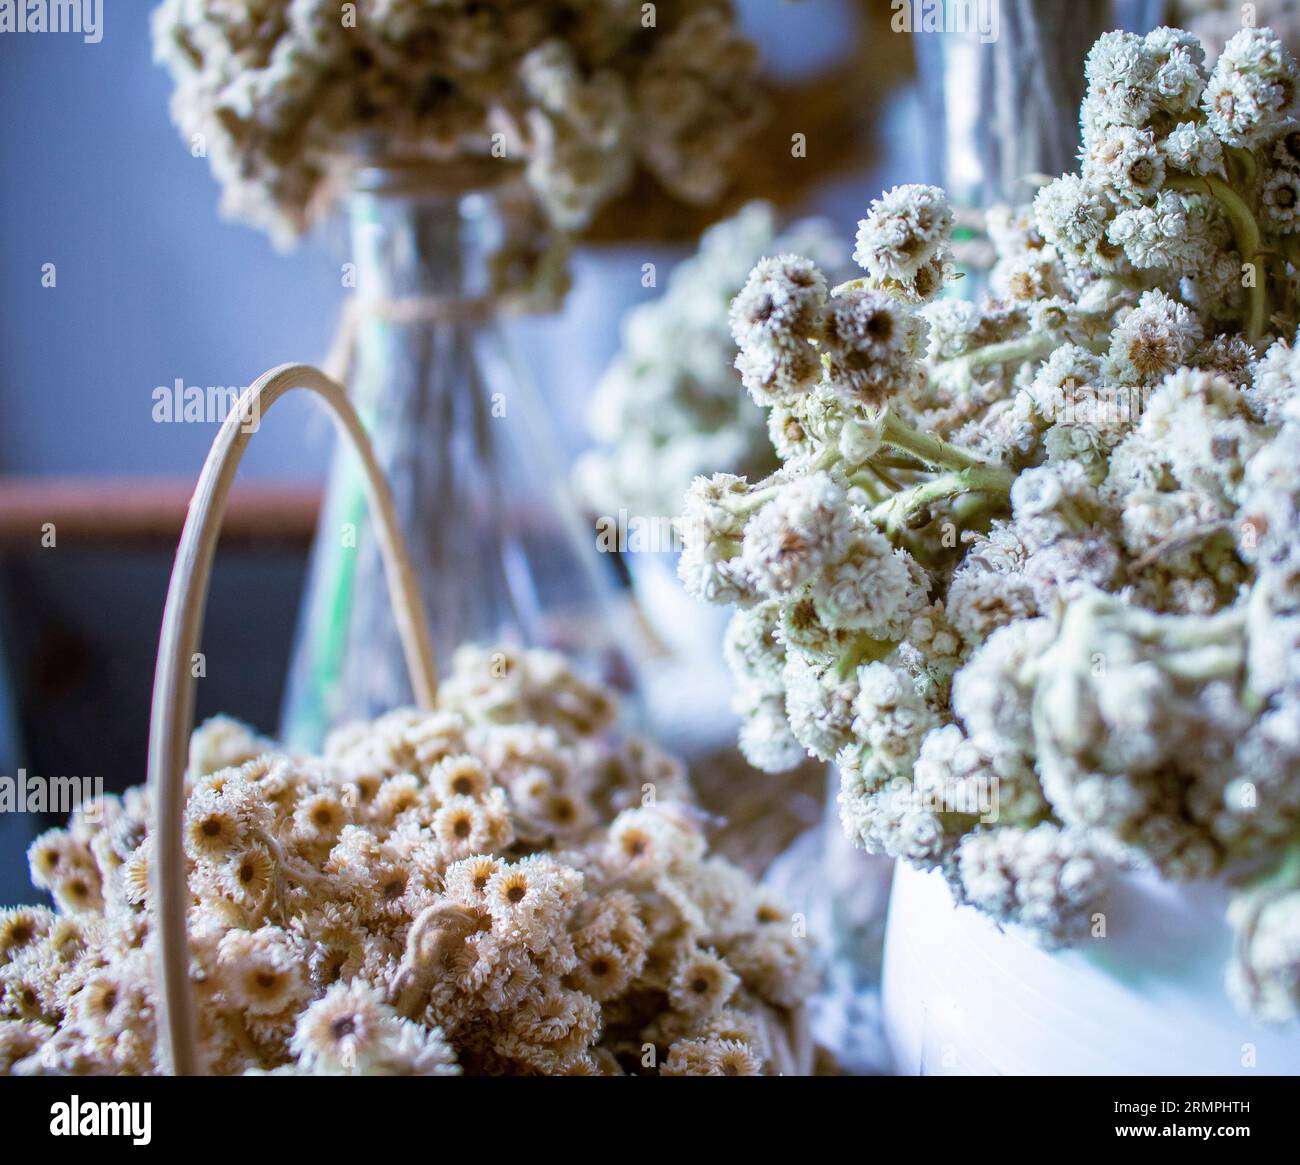 edelweiss plants that decorate the room Stock Photo